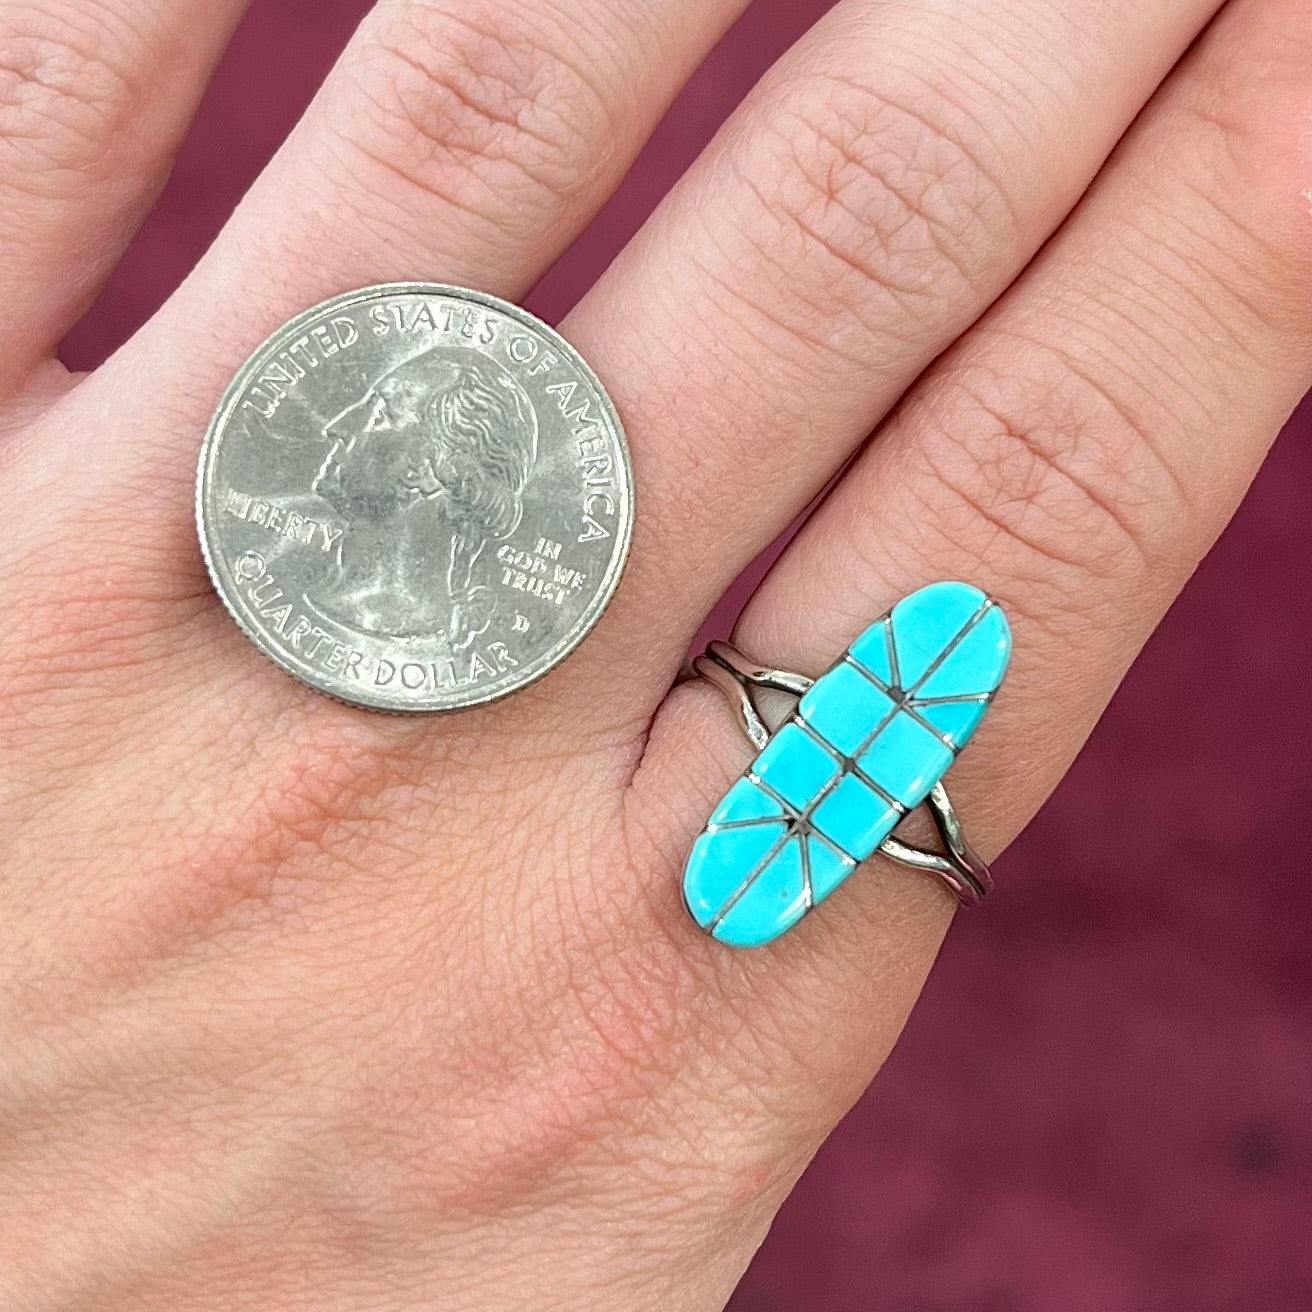 A handmade silver turquoise ring inlaid with six pieces of Sleeping Beauty turquoise.  The back of the ring is signed "FT".